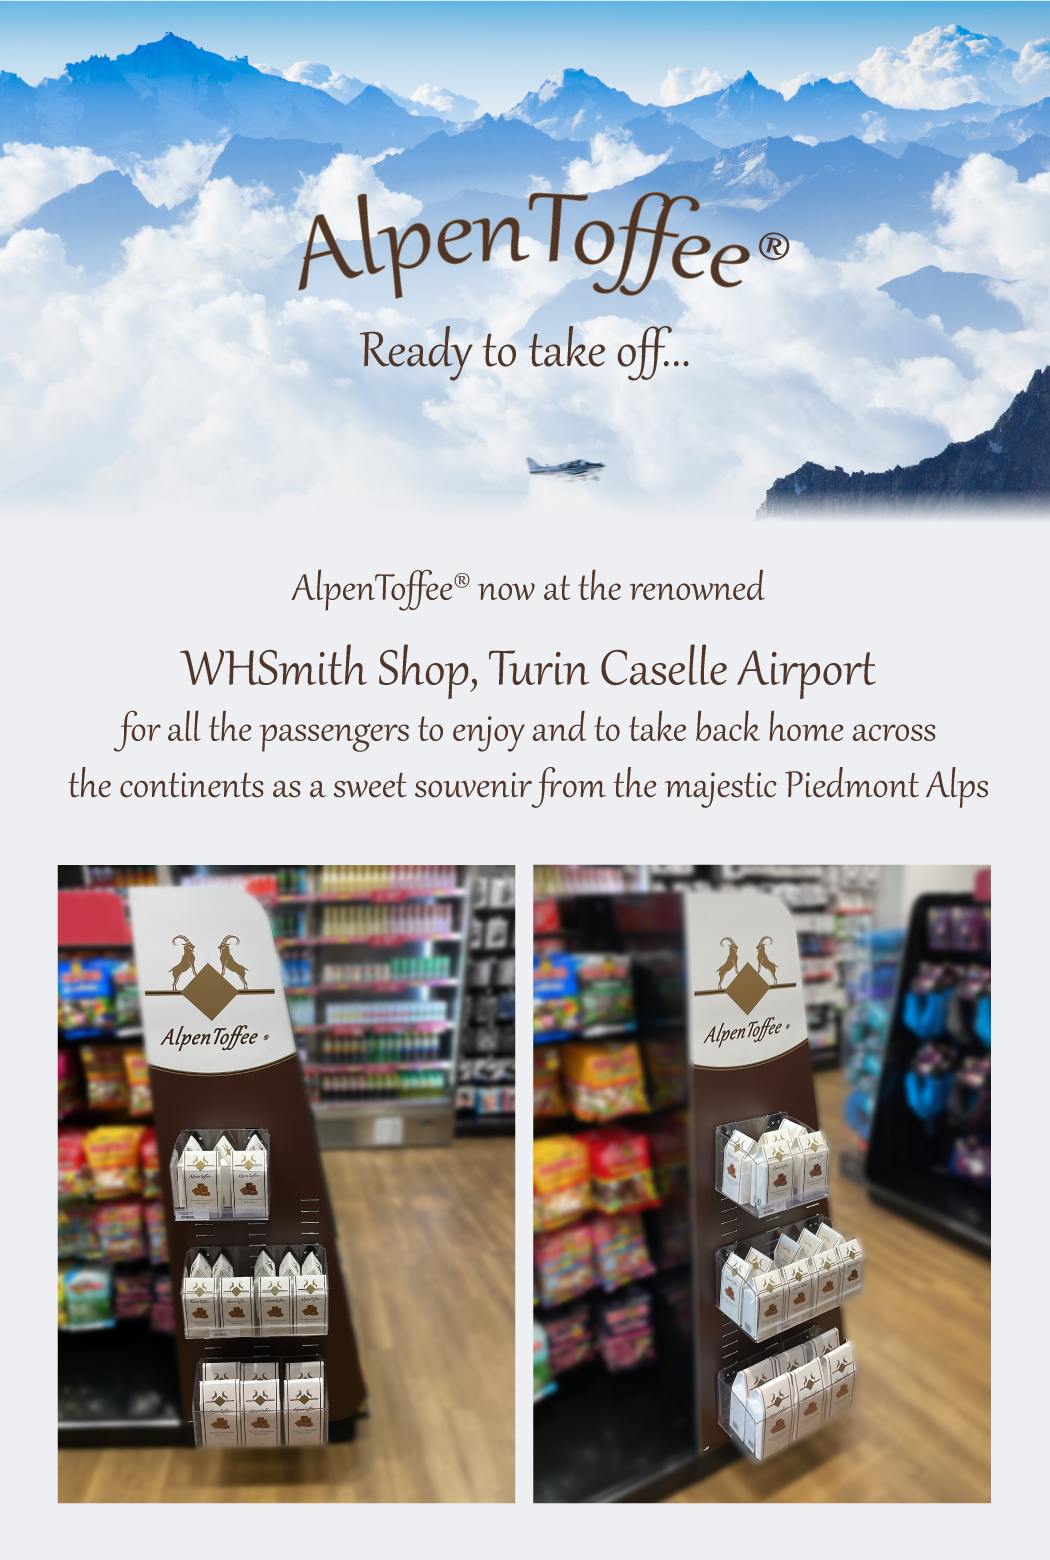 AlpenToffee now available at WHSmith Turin Caselle airport